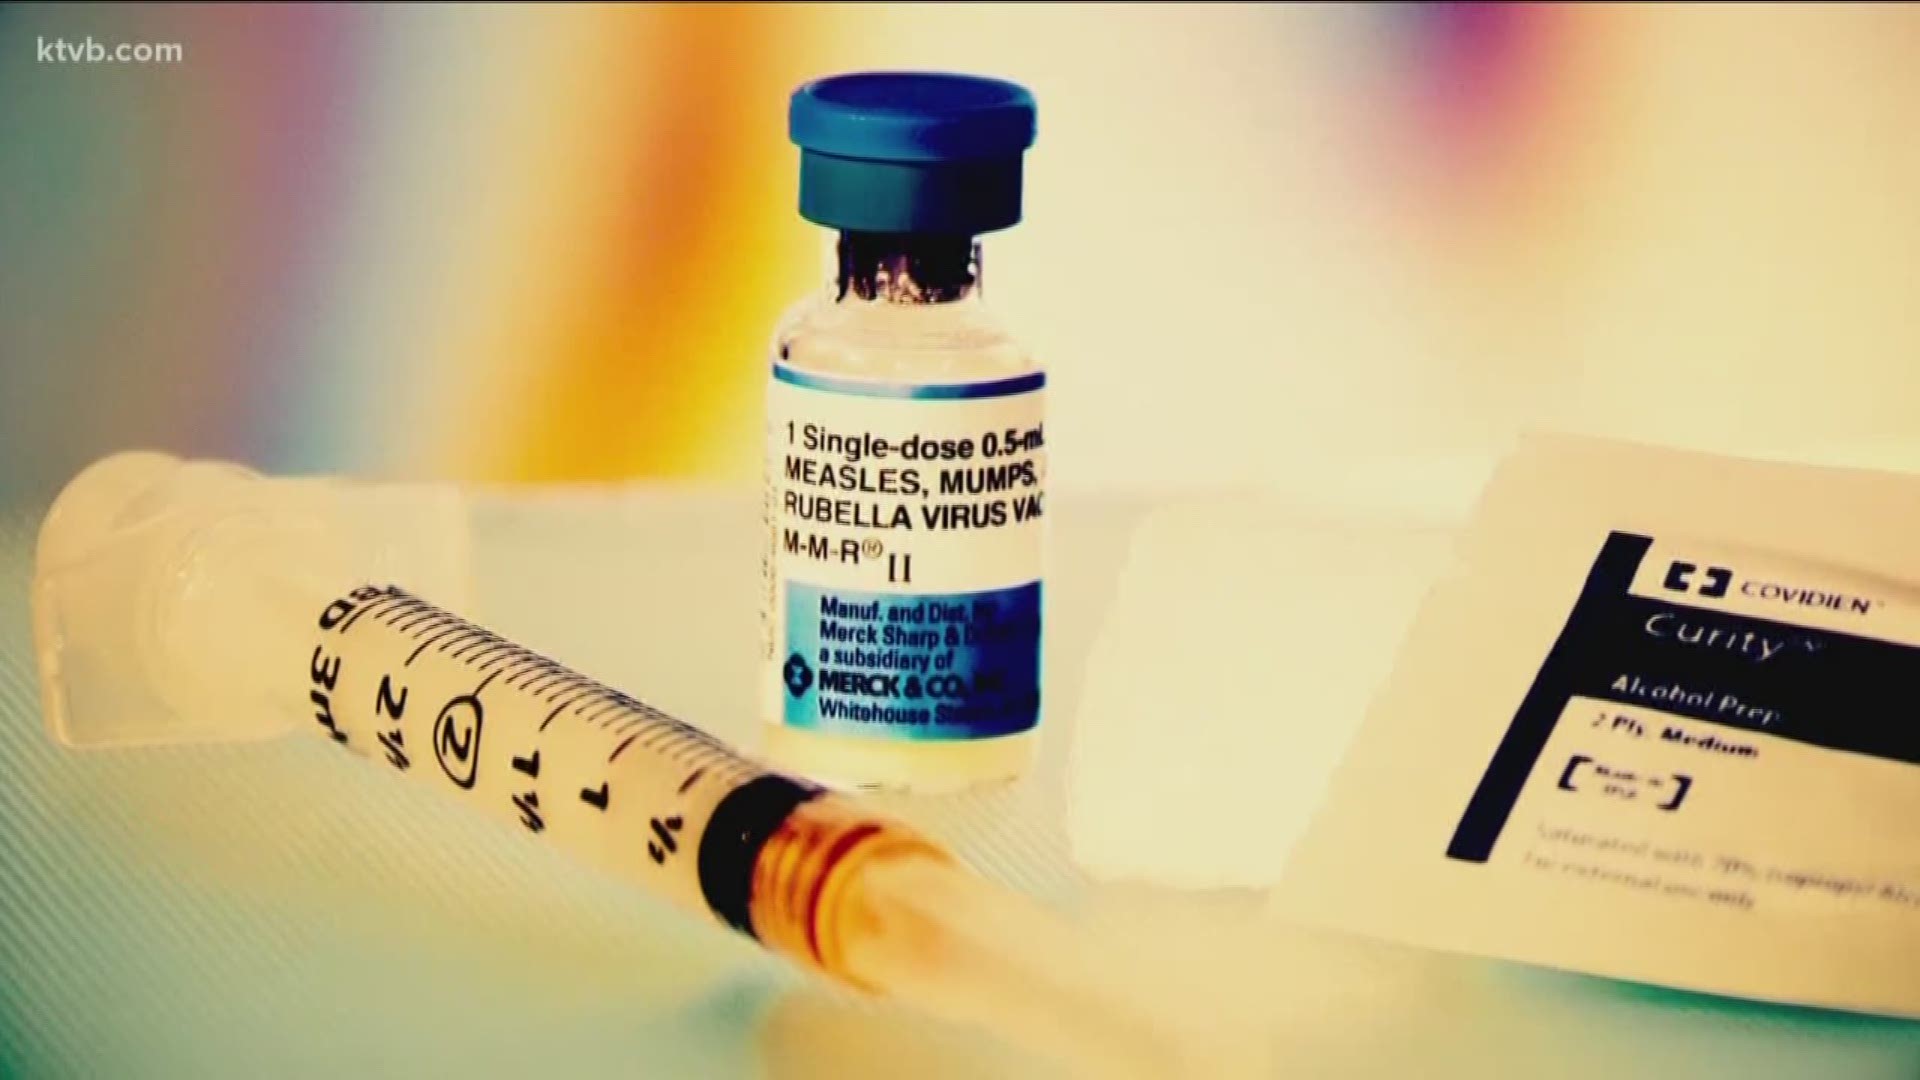 Idaho is among the states with the lowest vaccine rates in the country.